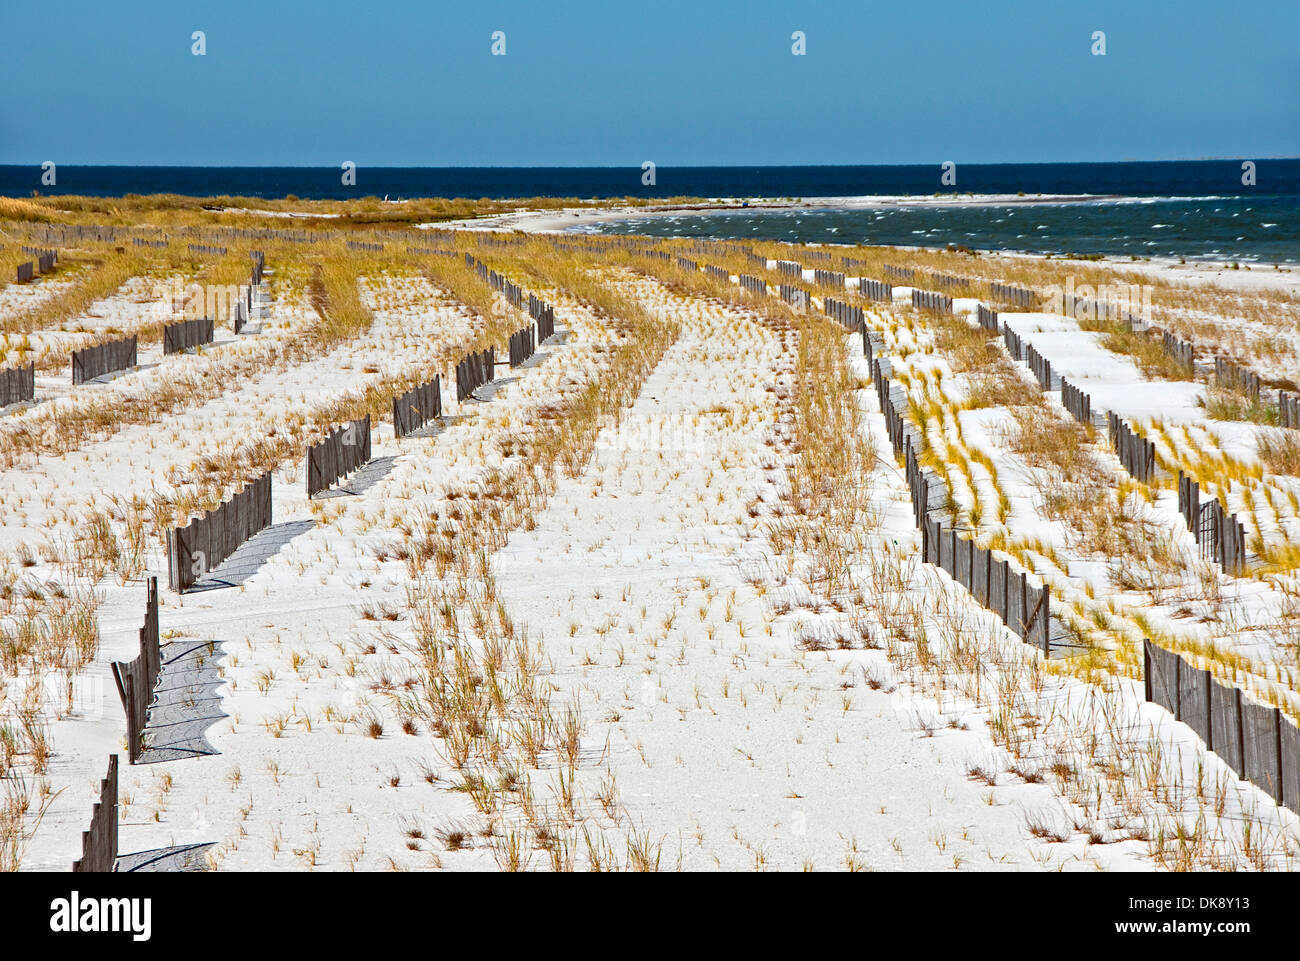 Fences to control sand erosion on West Ship Island of Gulf Islands National Seashore in Gulf of Mexico. Stock Photo